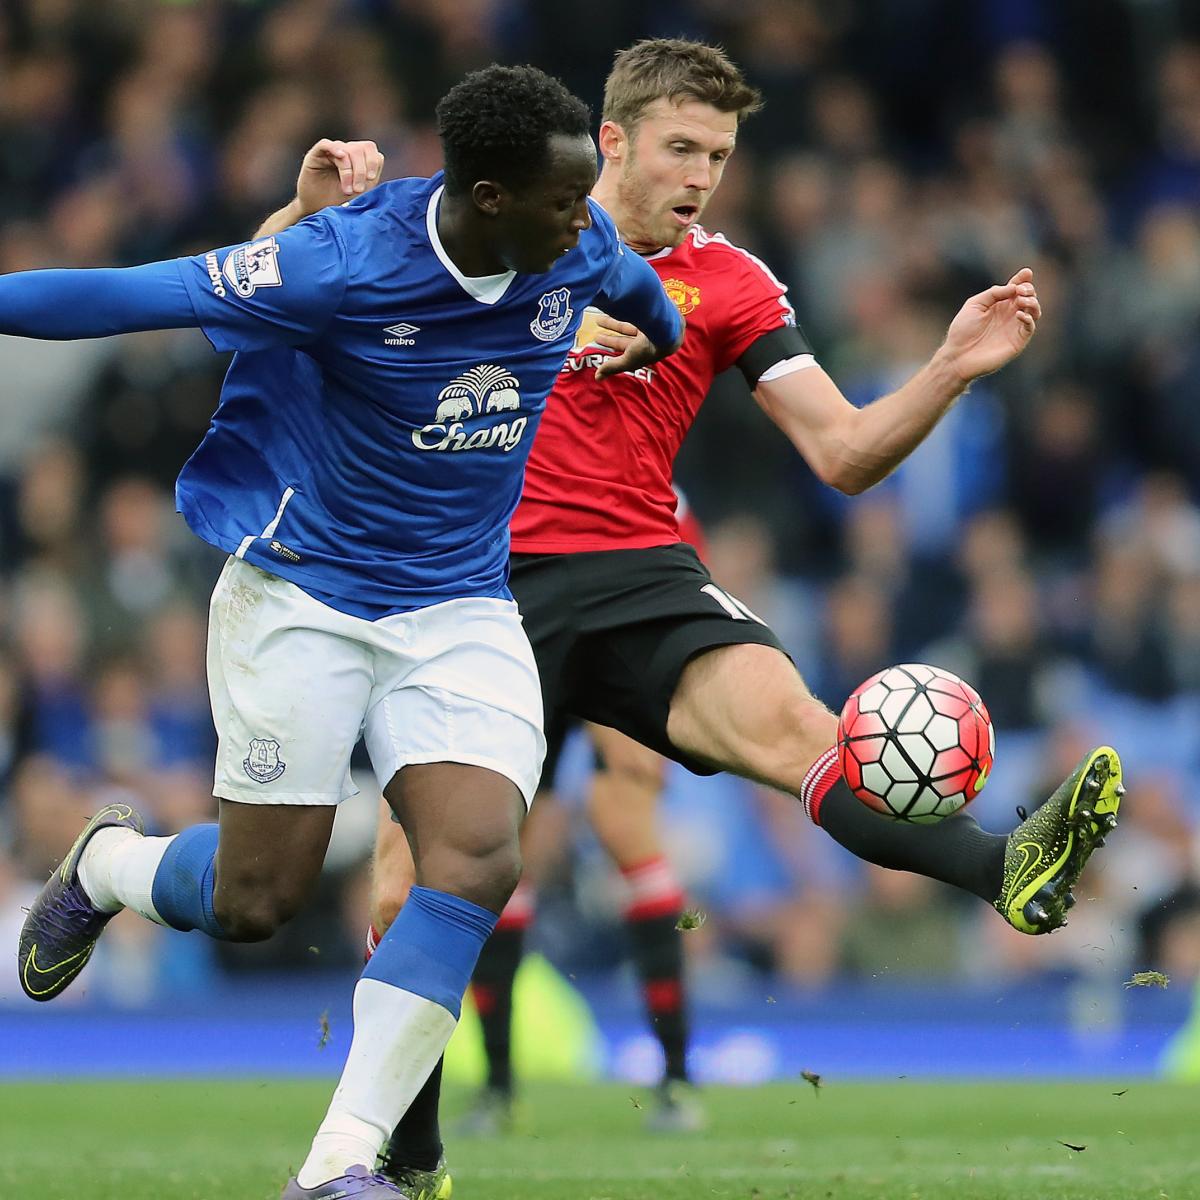 Manchester United vs. Everton: Live Score, Highlights from Premier